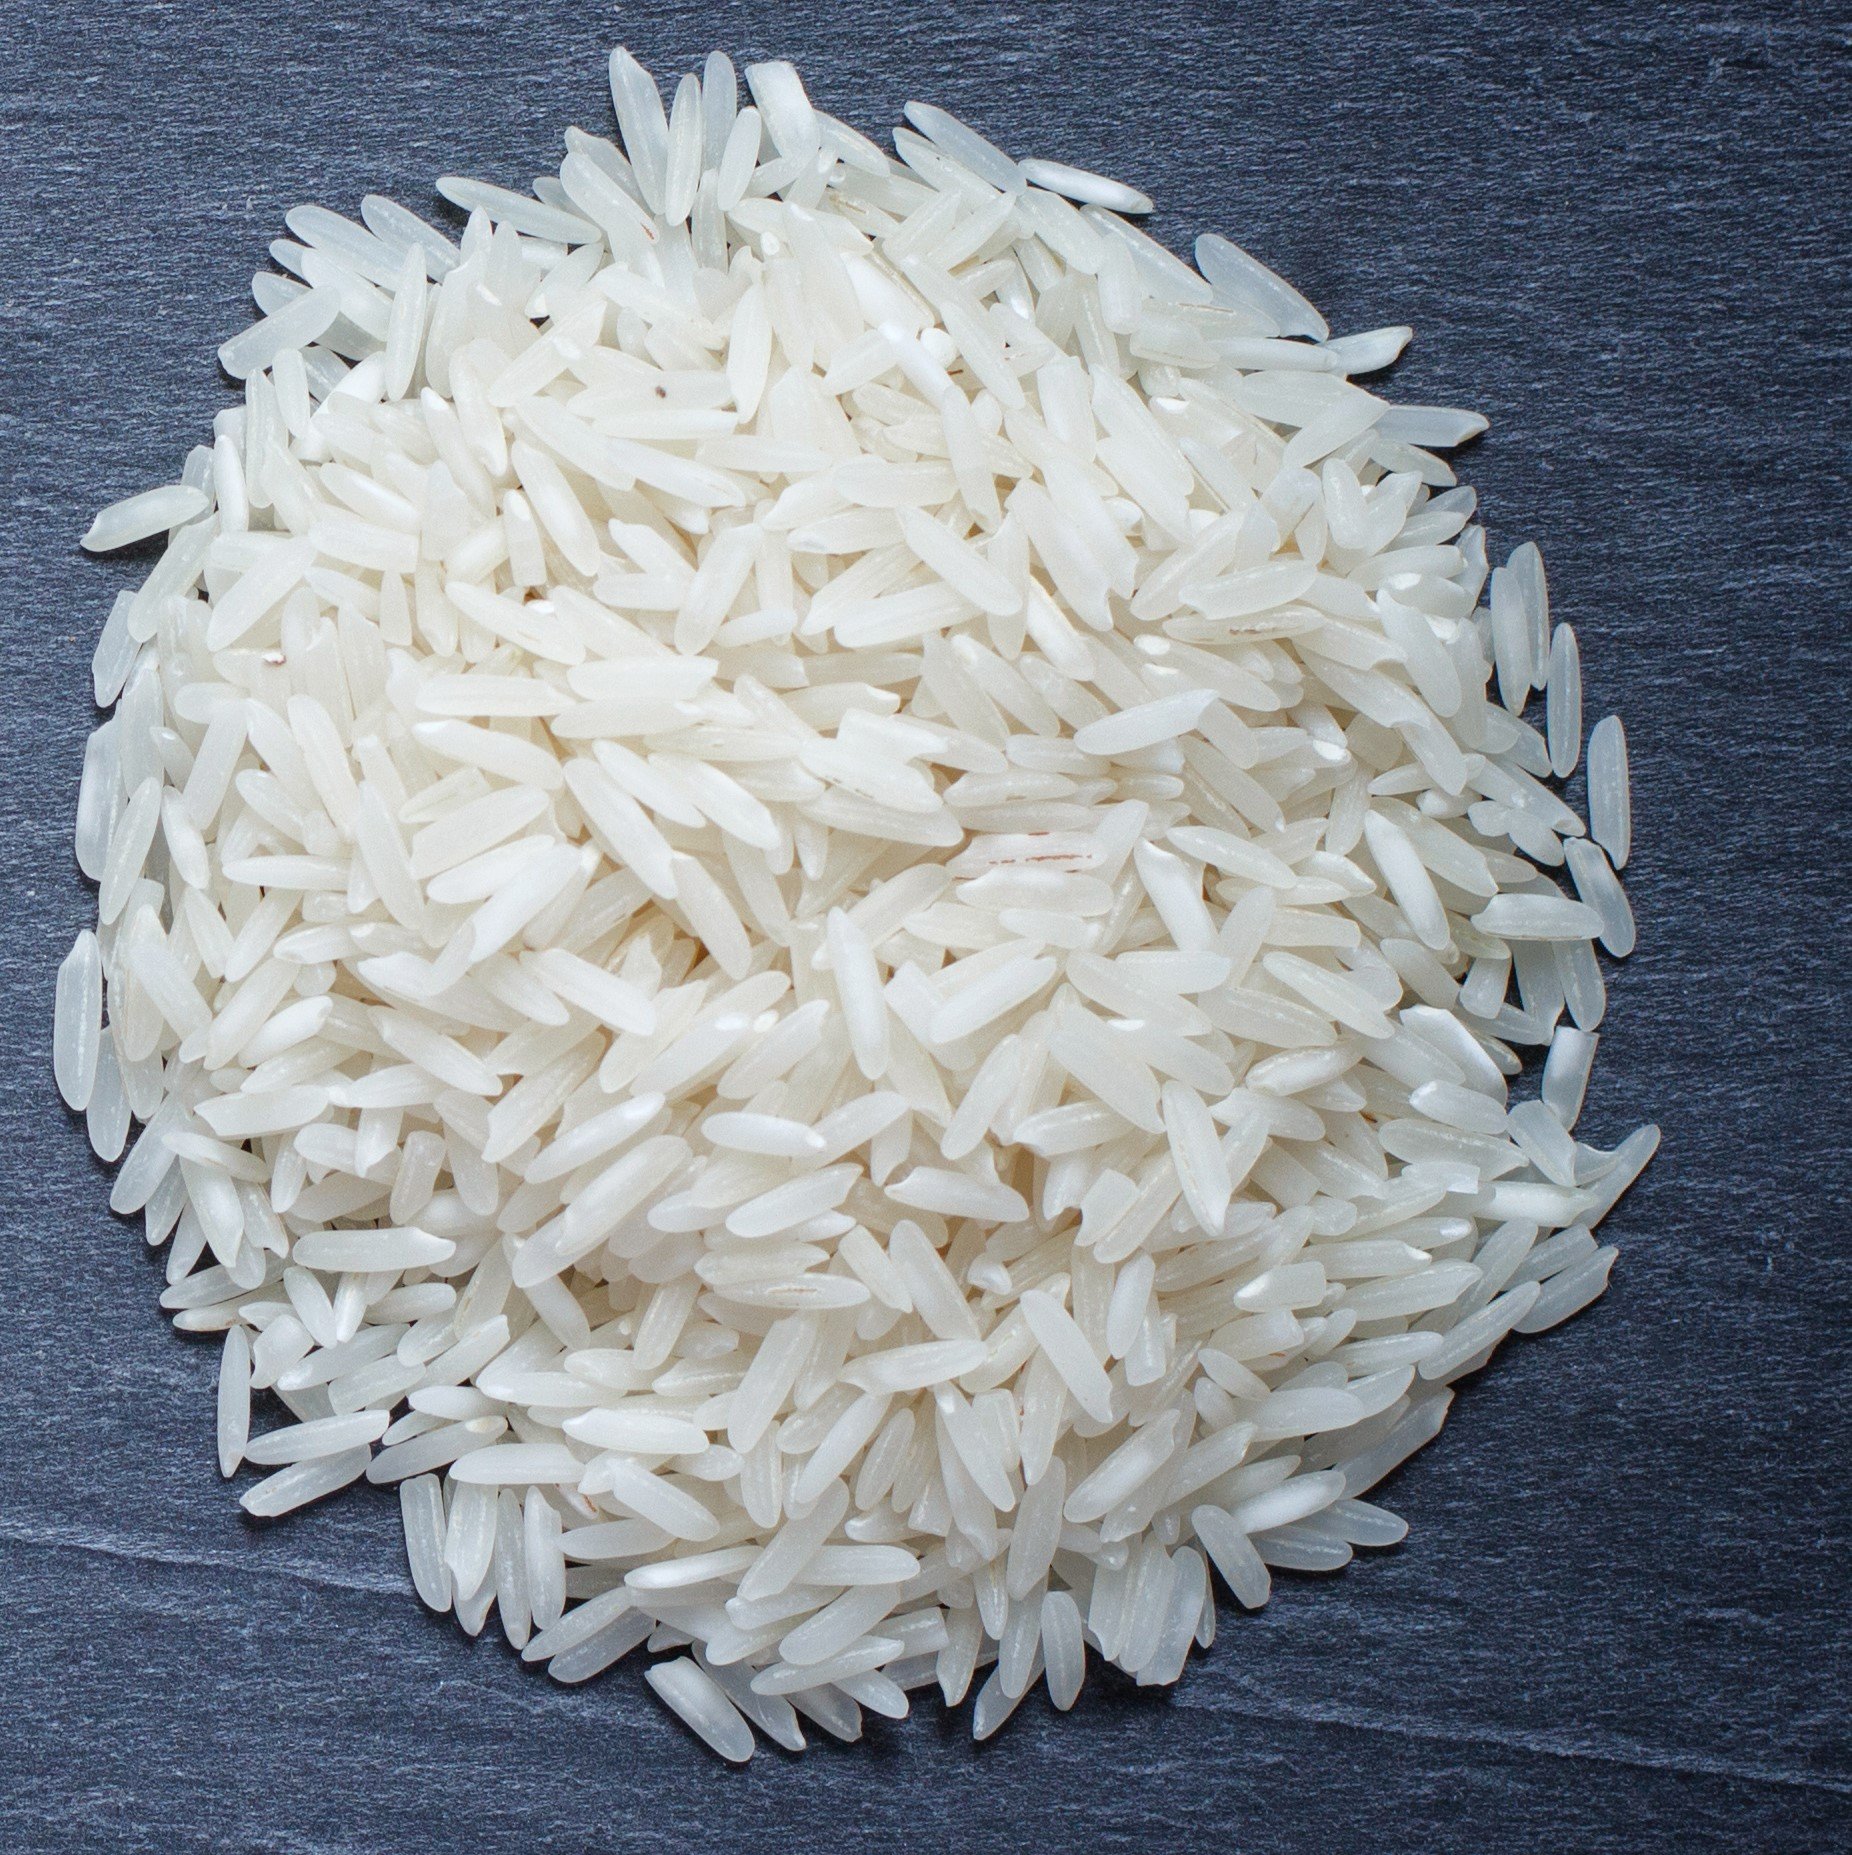 In one corner, we have white rice!